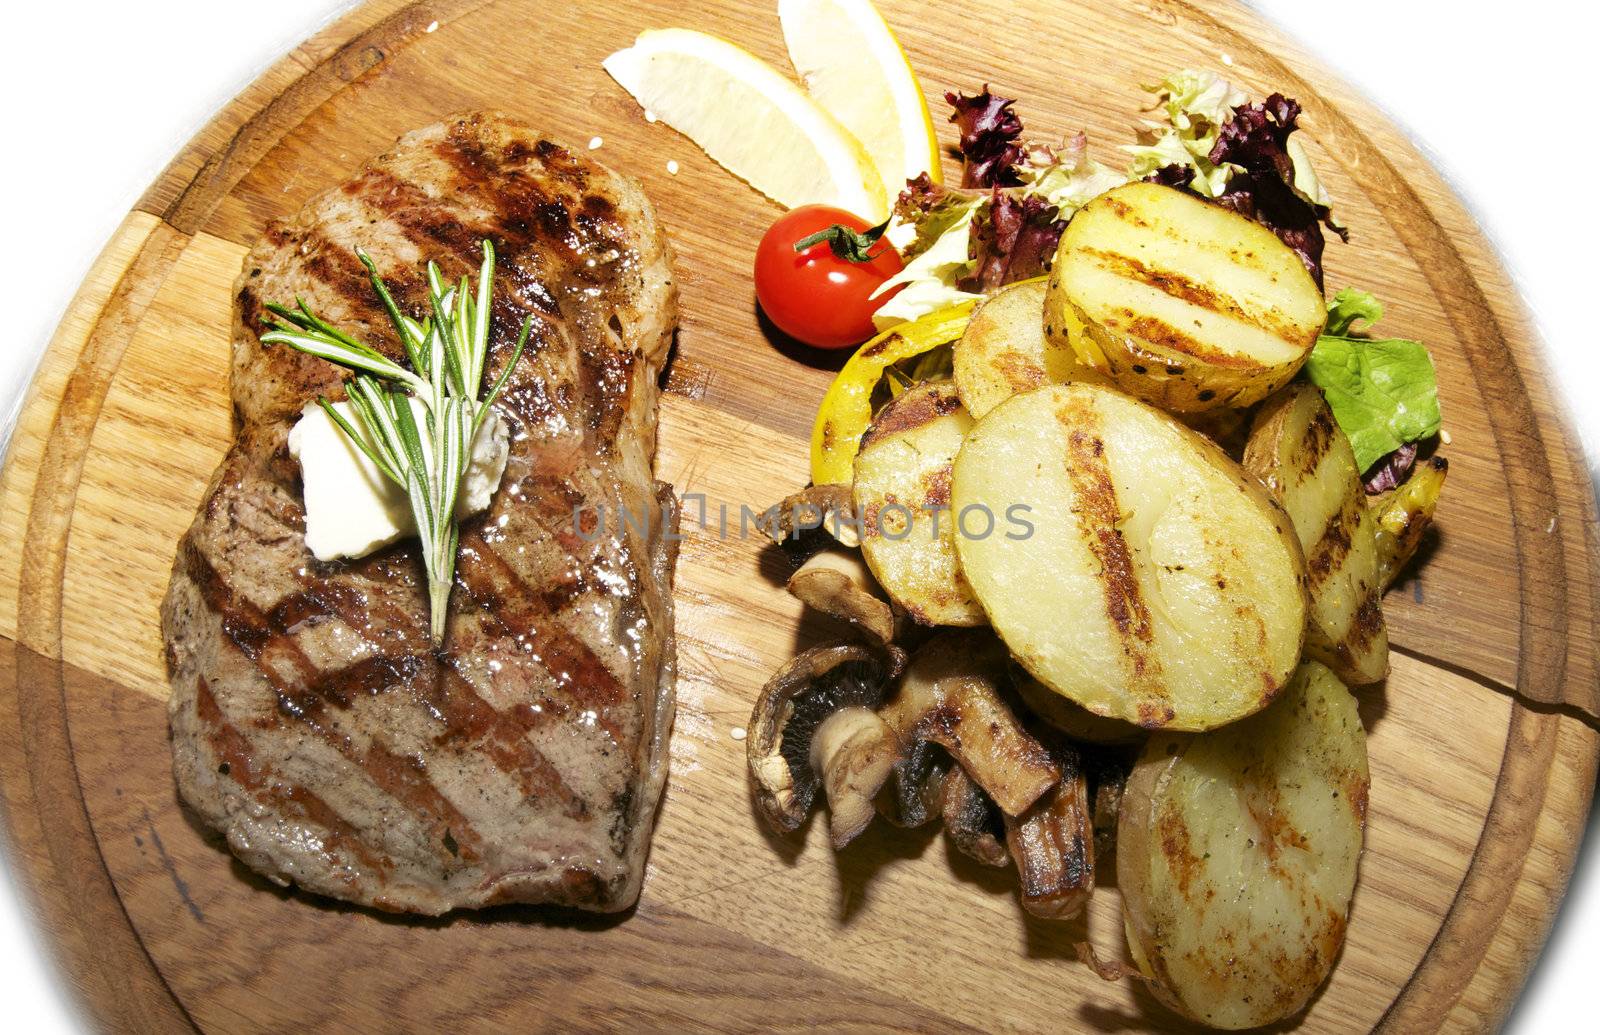 steak and potatoes on a large wooden plate with vegetables